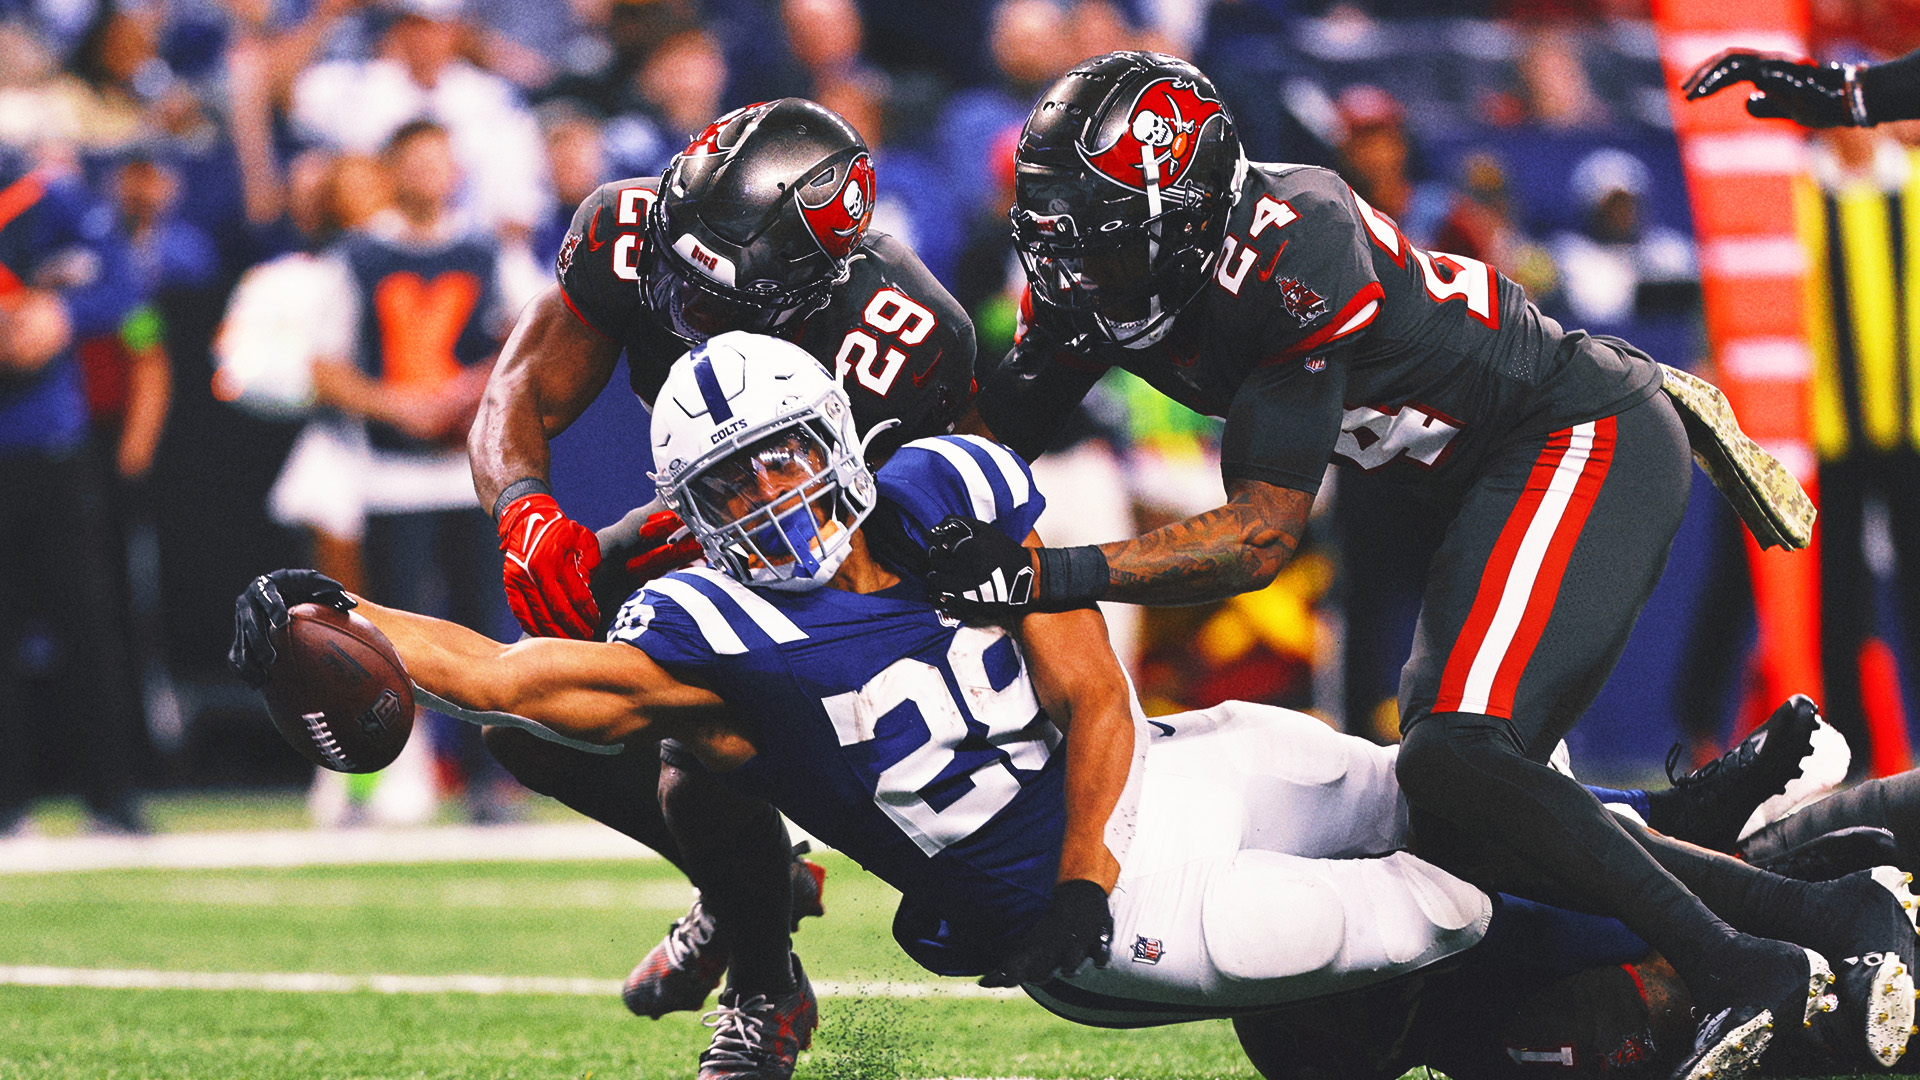 Jonathan Taylor scores twice to help Colts beat Buccaneers 27-20